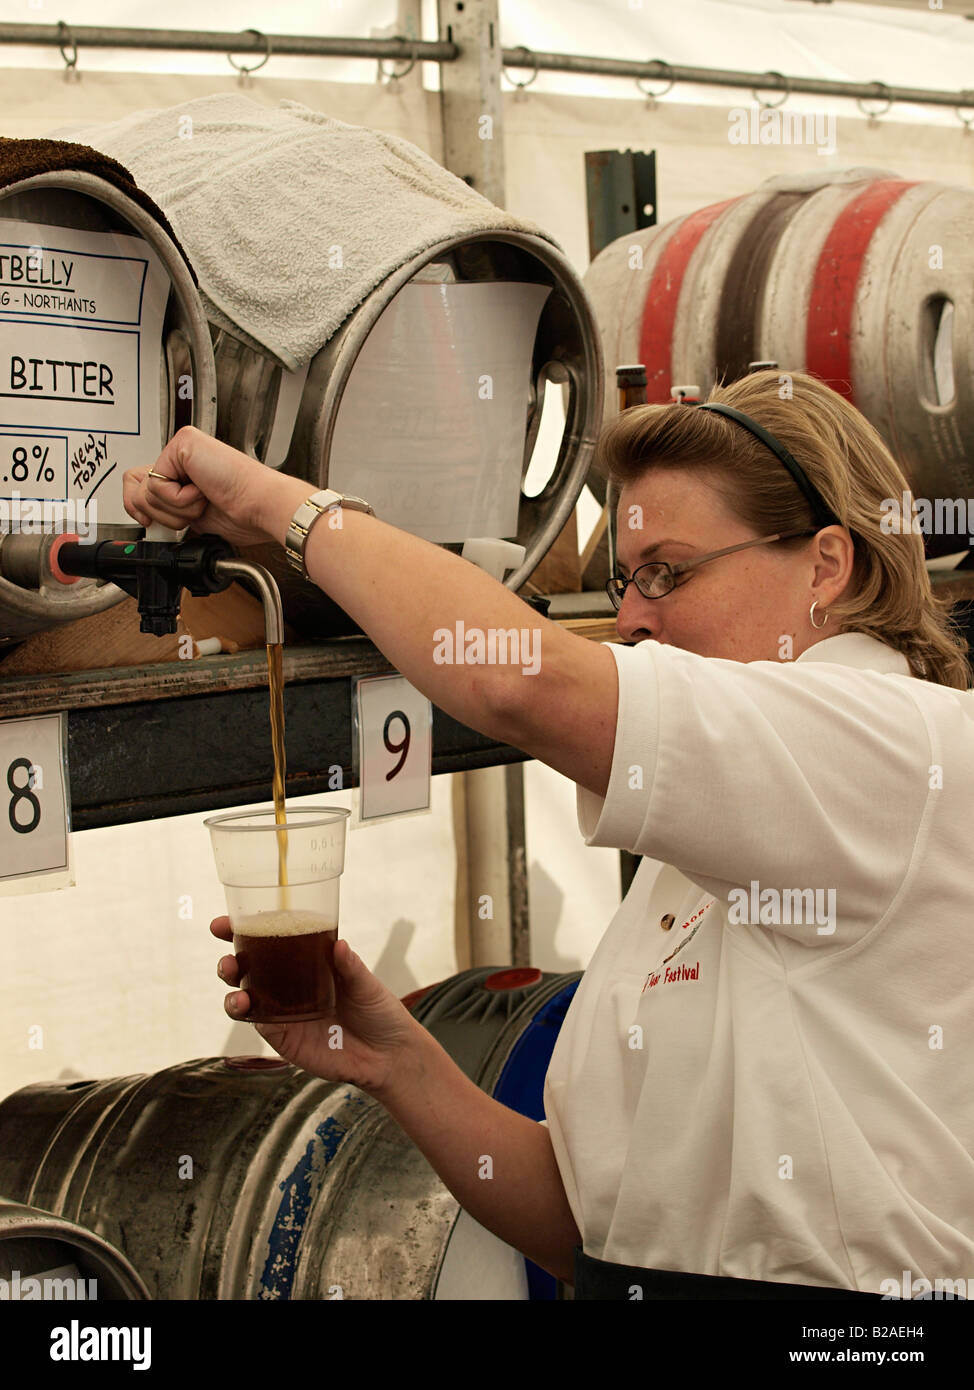 FEMALE BAR STAFF POURING PINT OF REAL ALE BEER FROM RACKED BARREL AT BEER FESTIVAL AT SHERINGHAM NORTH NORFOLK ENGLAND UK Stock Photo